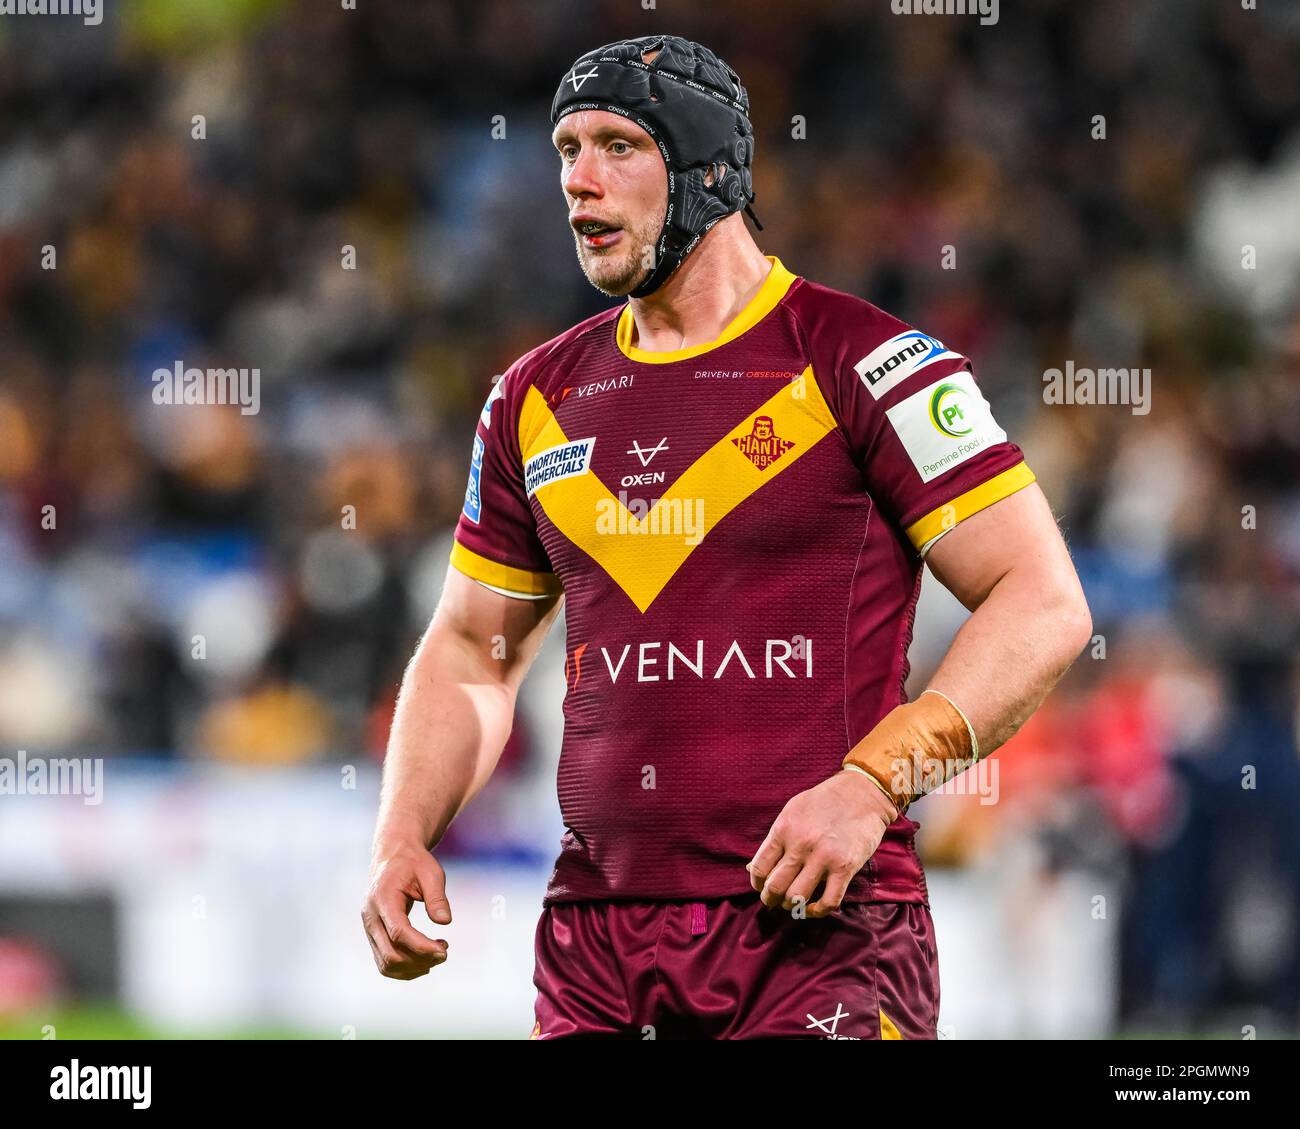 Chris Hill #8 of Huddersfield Giants during the Betfred Super League Round 6 match Huddersfield Giants vs St Helens at John Smith's Stadium, Huddersfield, United Kingdom, 23rd March 2023  (Photo by Craig Thomas/News Images) Stock Photo